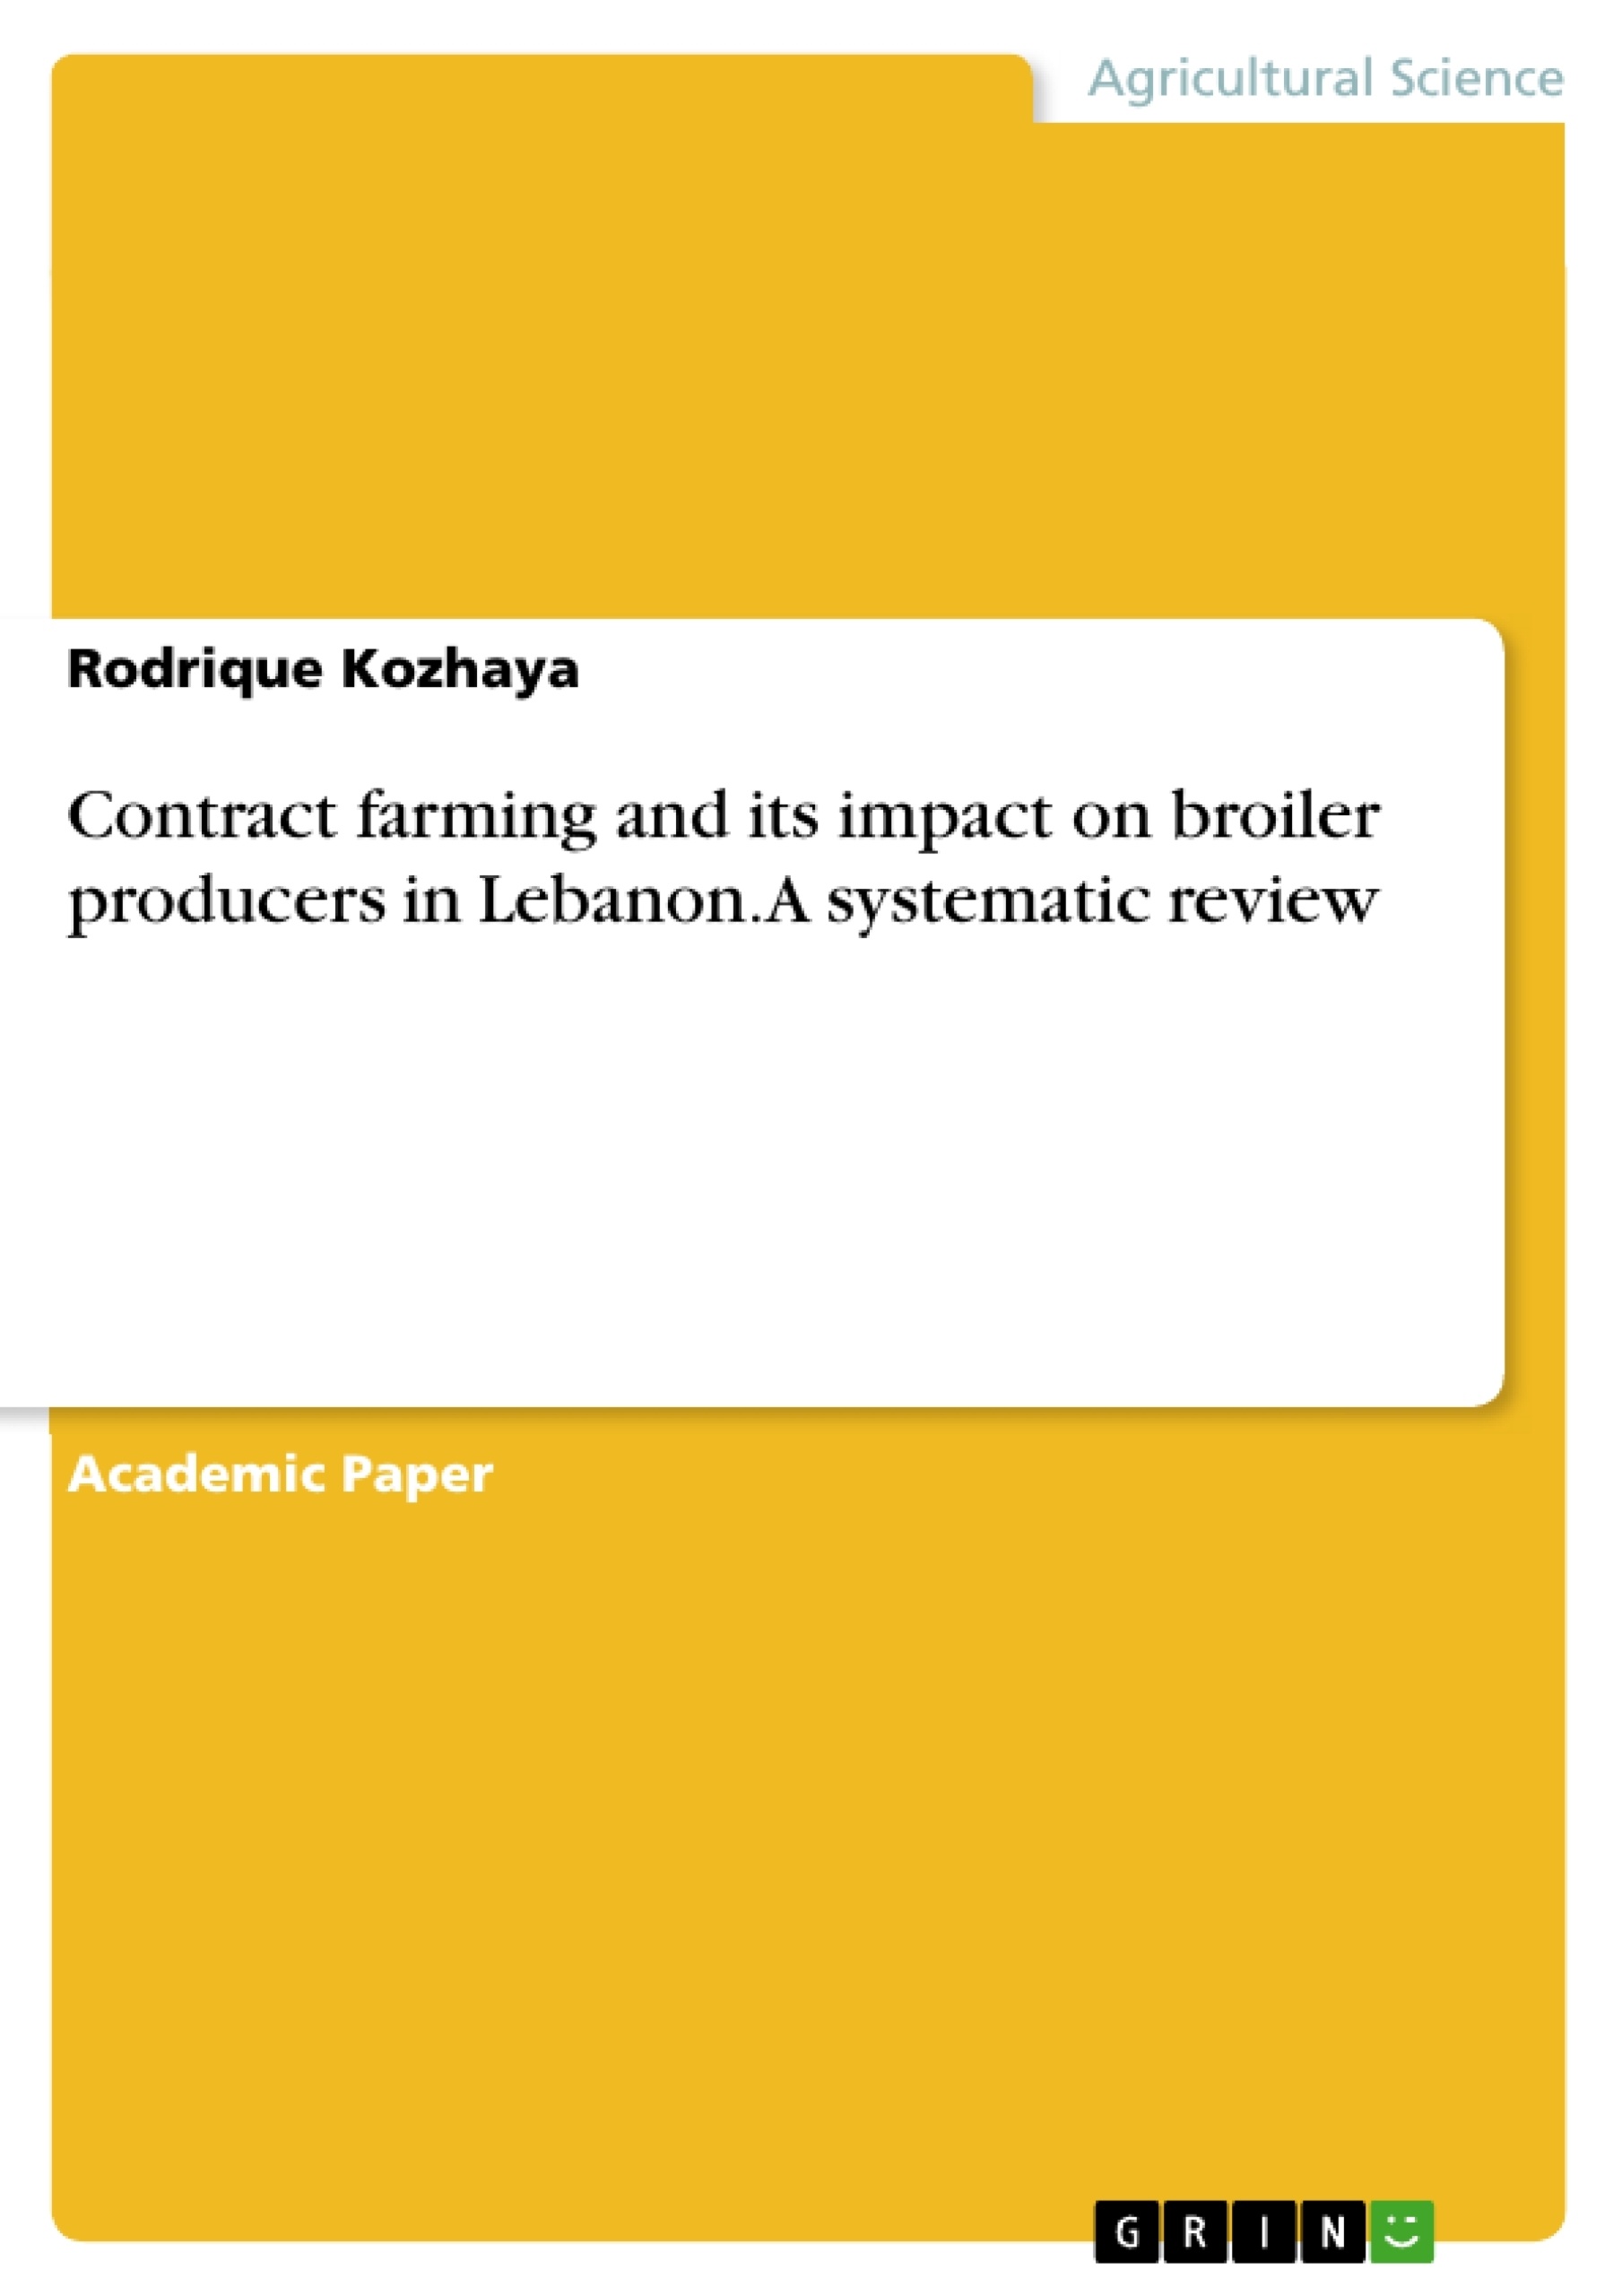 Titre: Contract farming and its impact on broiler producers in Lebanon. A systematic review